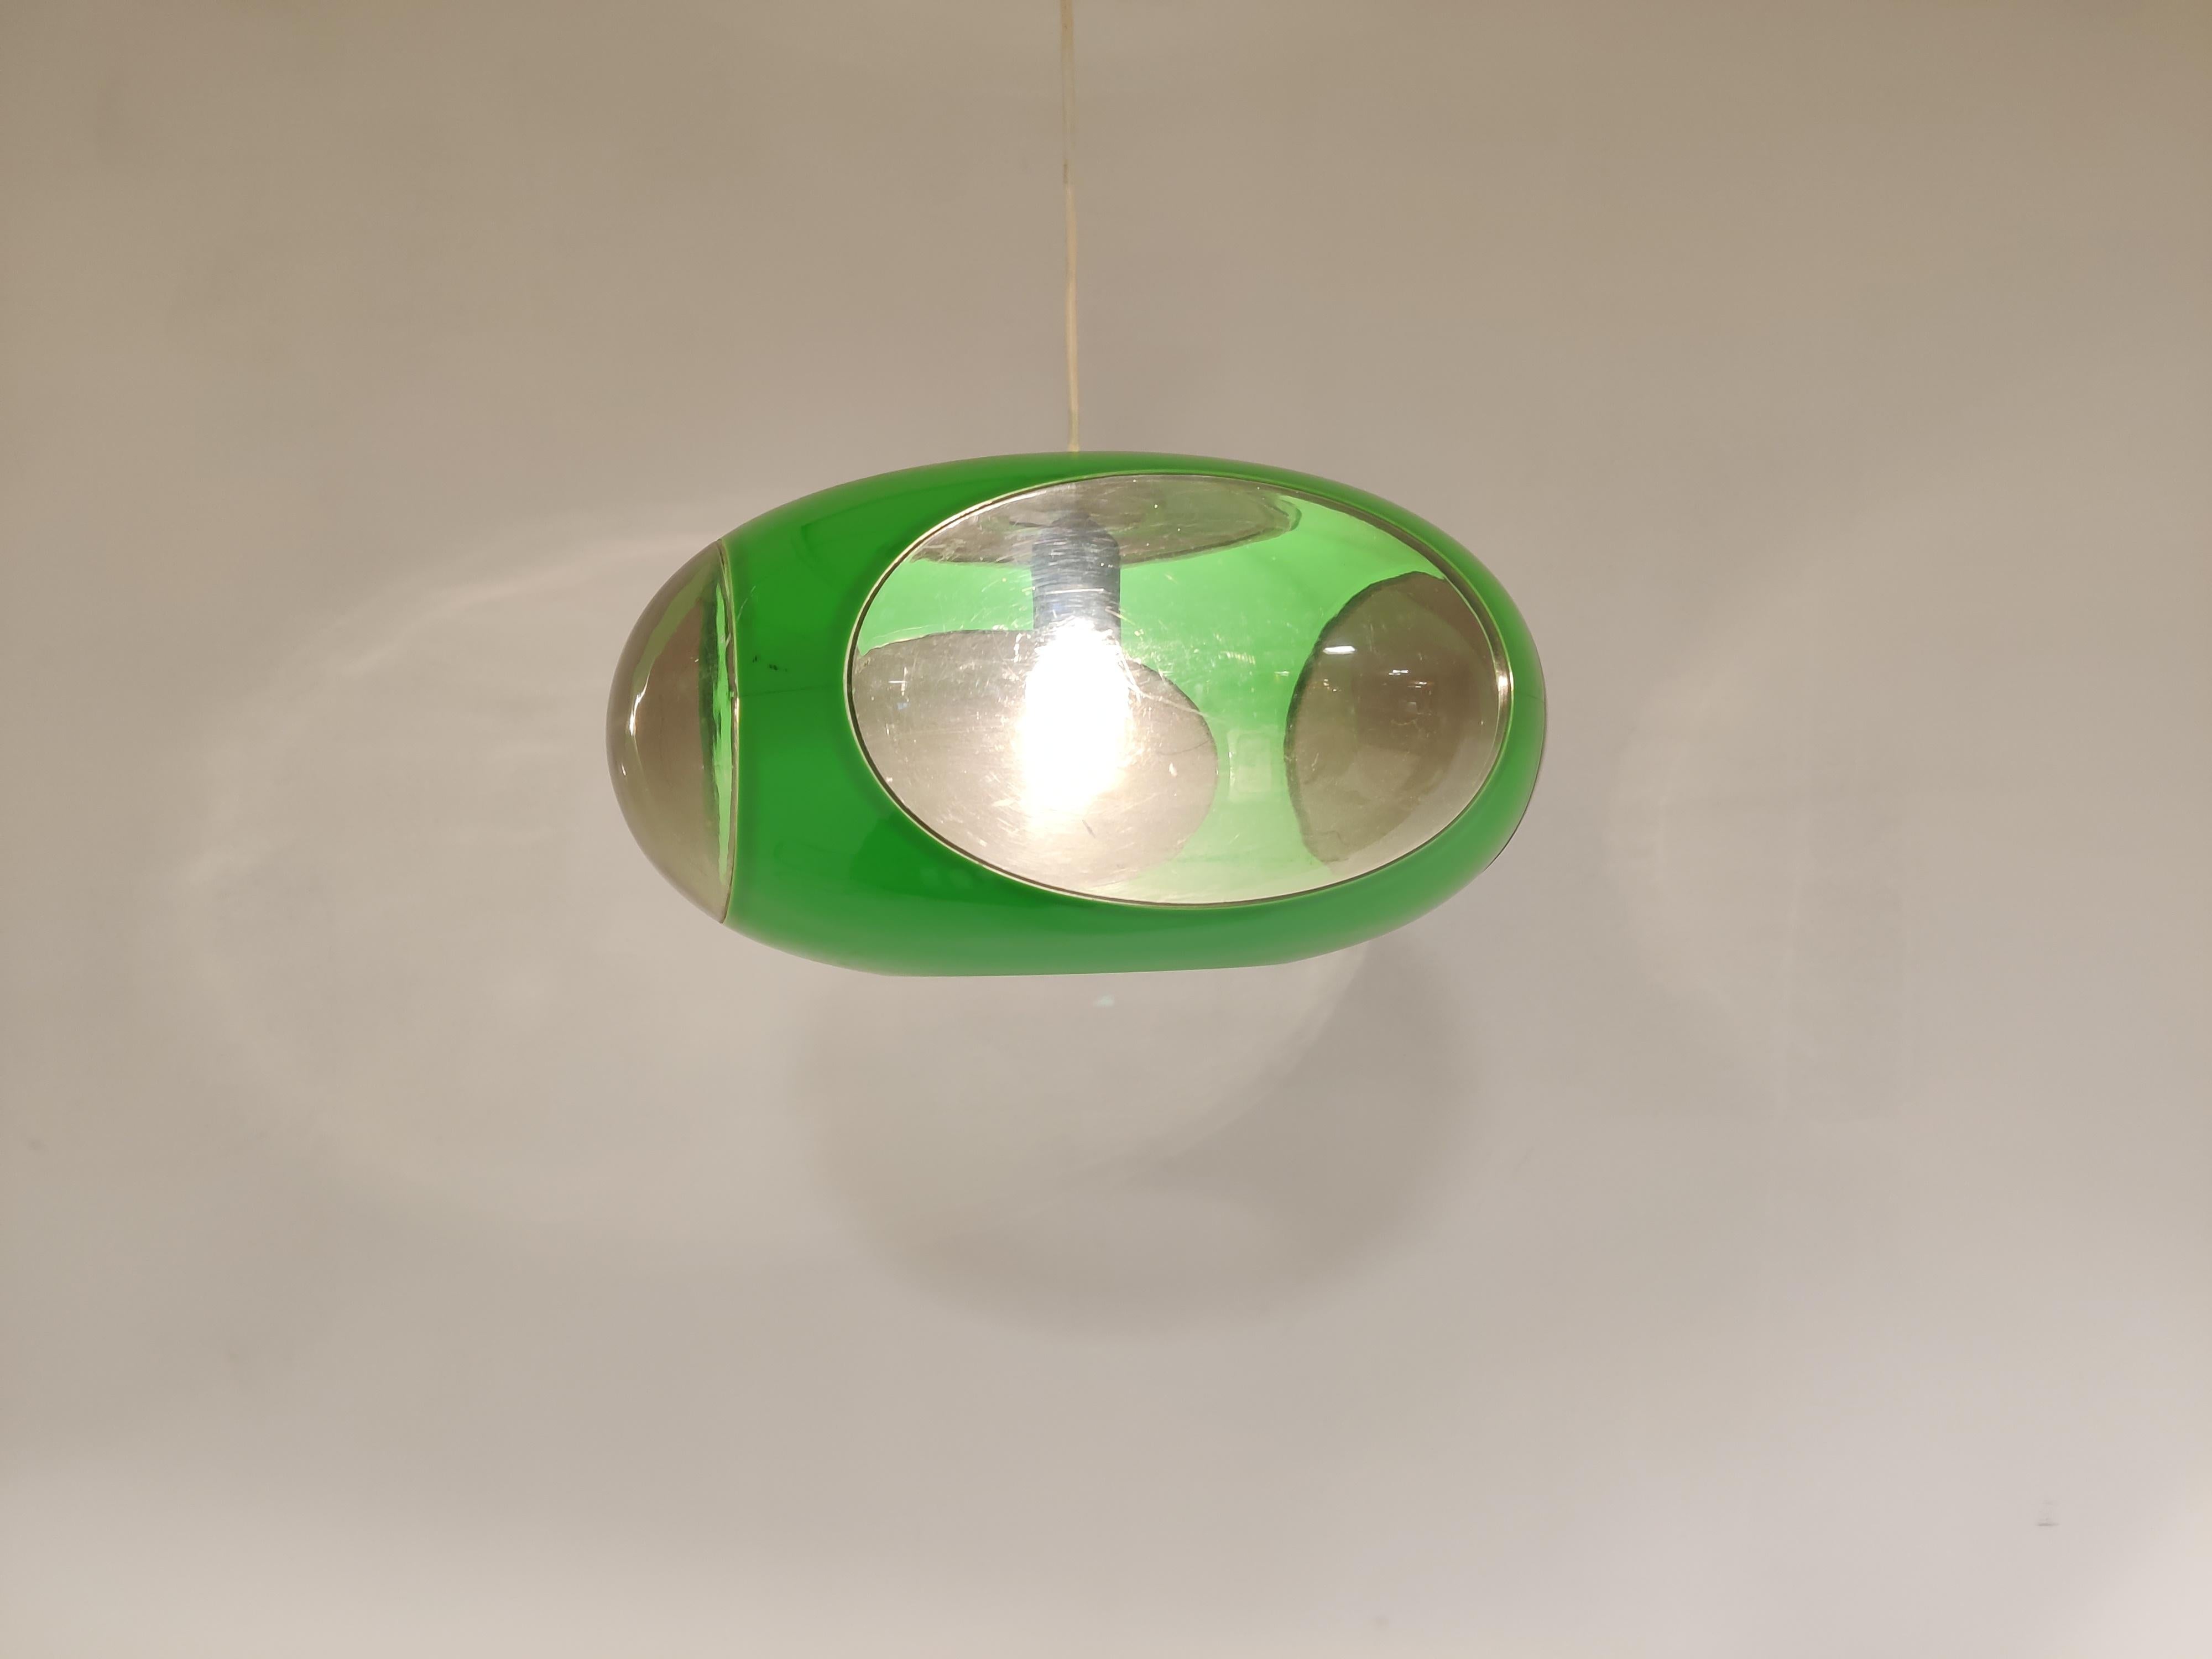 Mid century Space Age 'bug eye' or ufo pendant light by Massive.

The lamp is mostly referred to as Luigi Colani design but is not correct. These where produced in Belgium by a lighting company called Massive.

Nevertheless it is a great